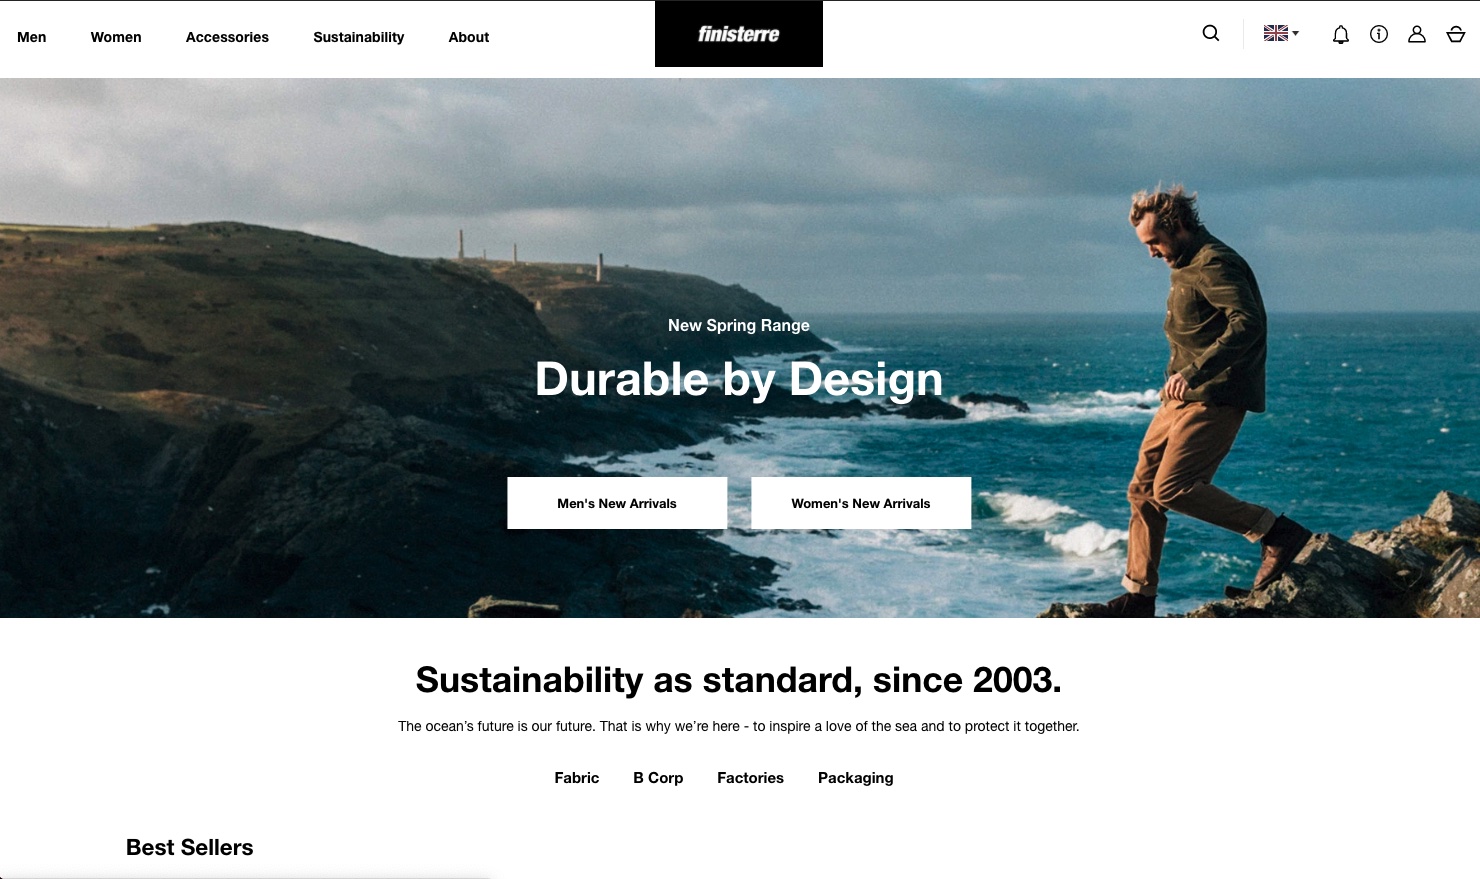 Brands replatformed from Magento to Shopify | Finisterre